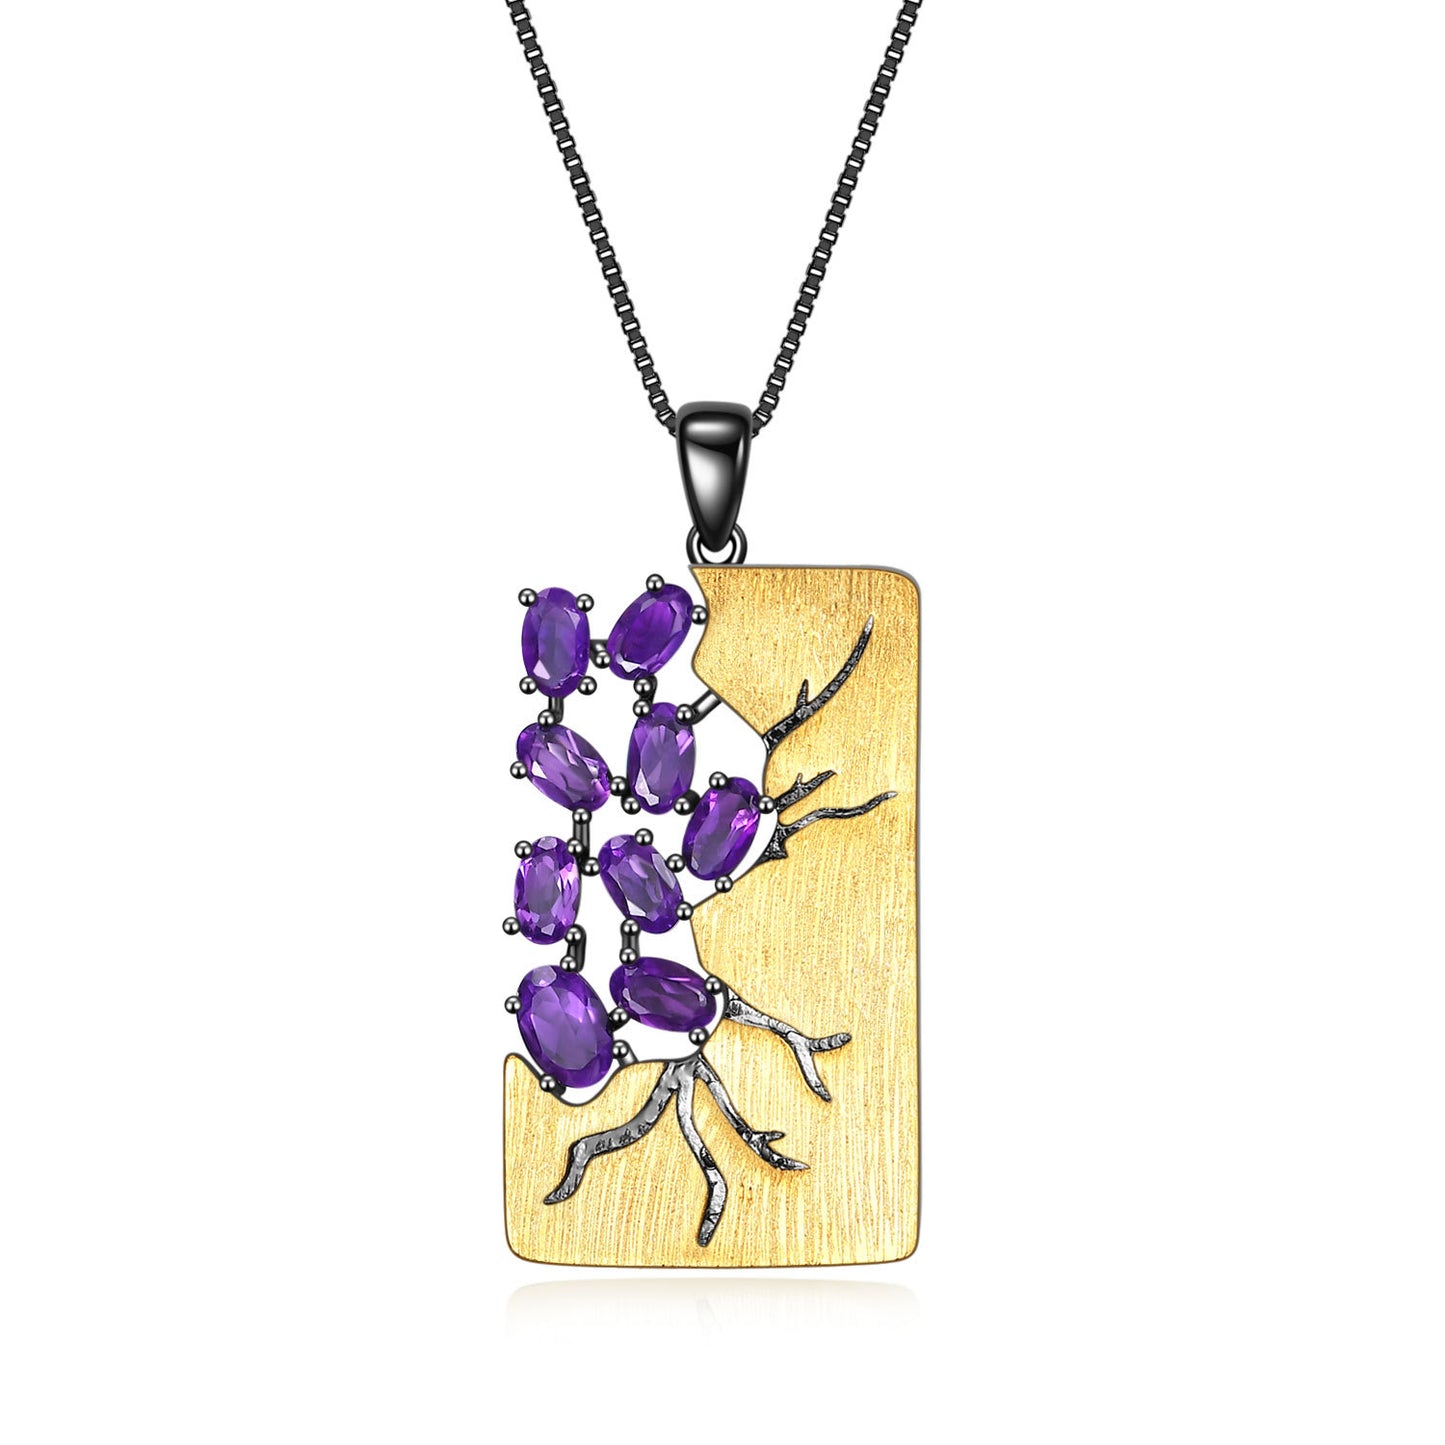 Italian Retro Jewelry Design Inlaid Natural Colourful Gemstone Branch Rectangle Pendant Silver Necklace for Women